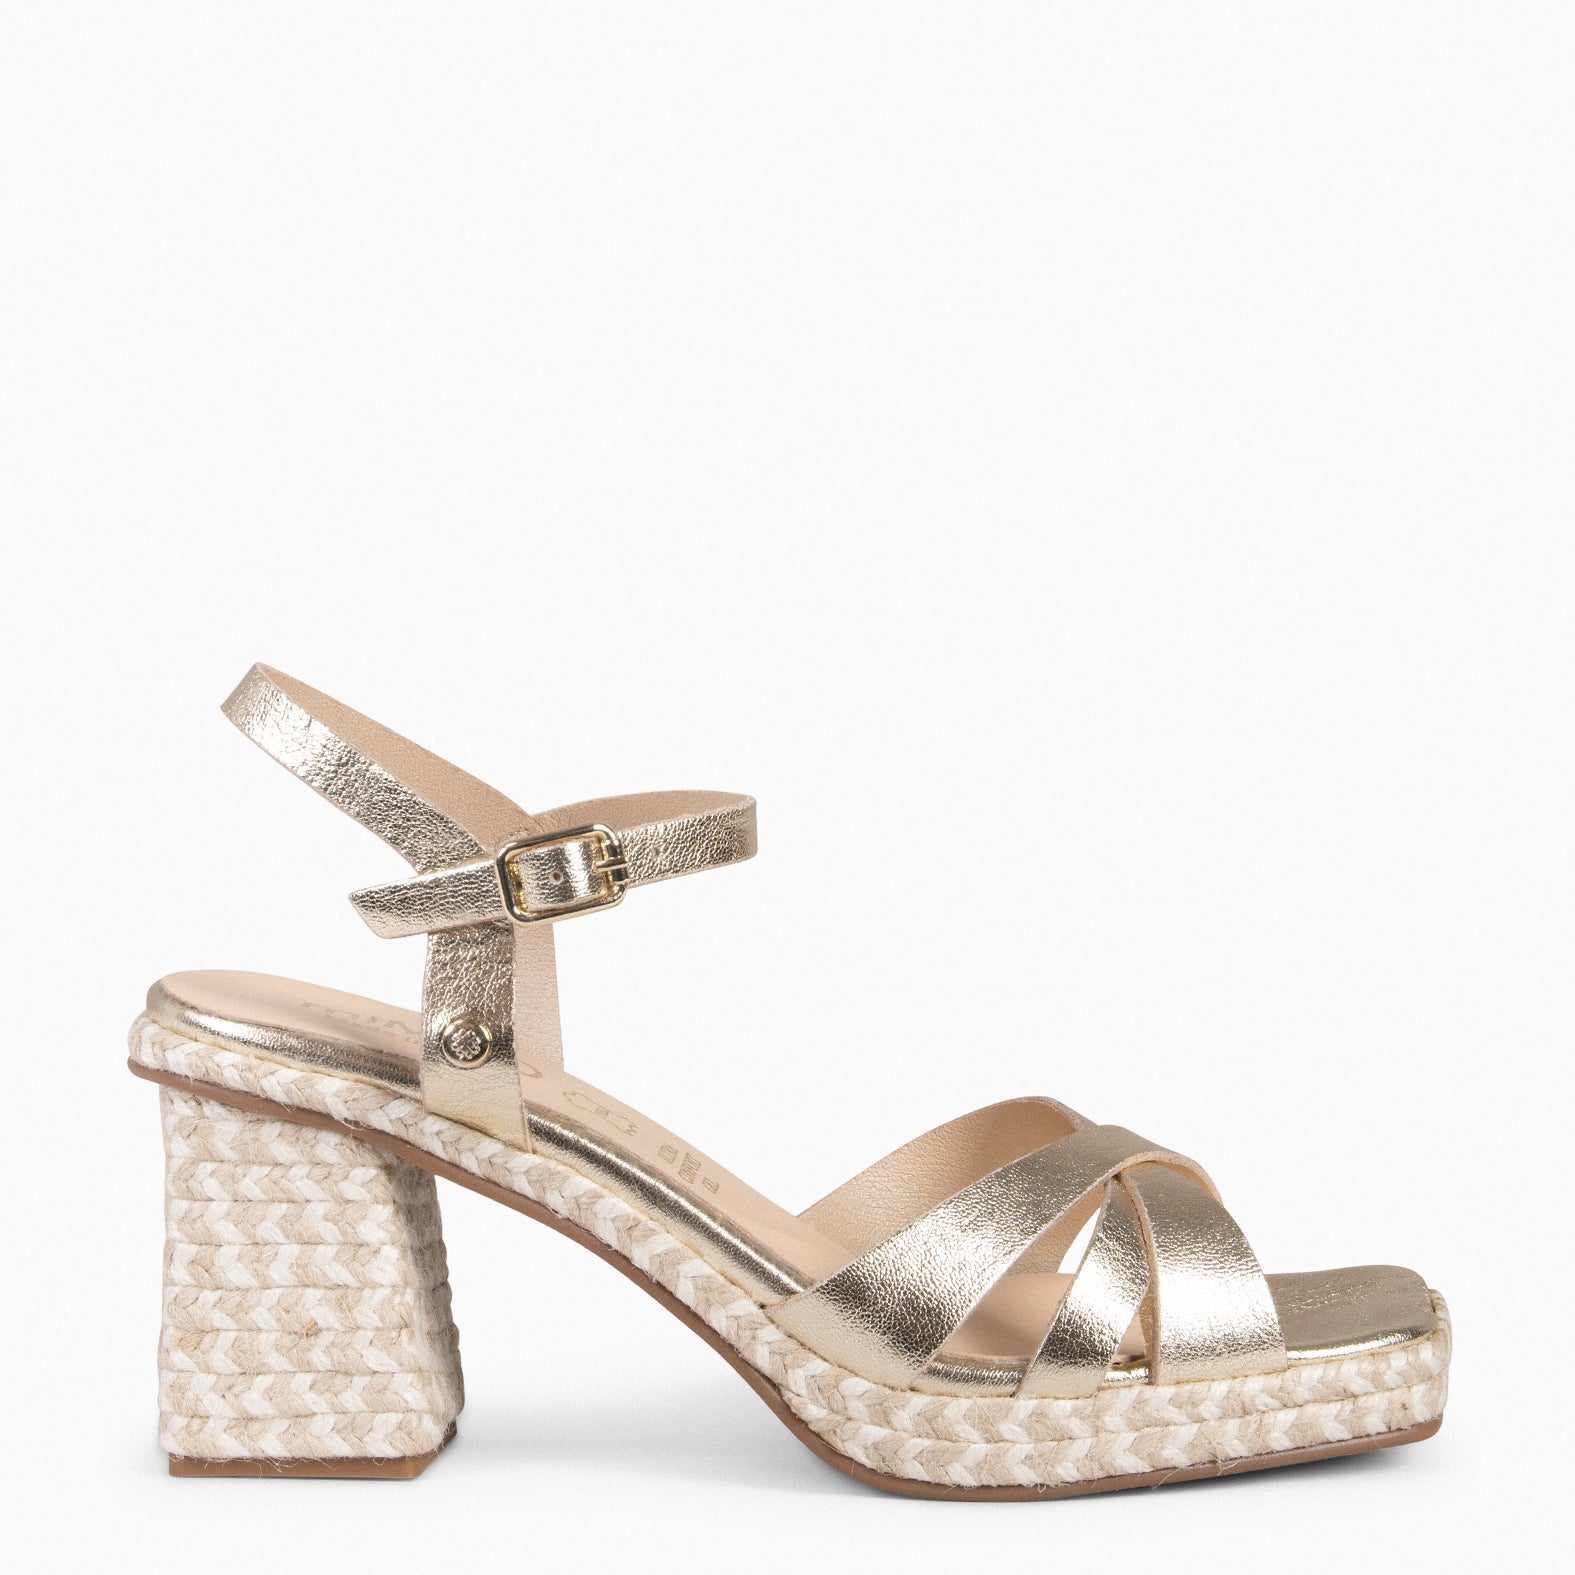 ANNA - GOLD Sandals with heel and platform